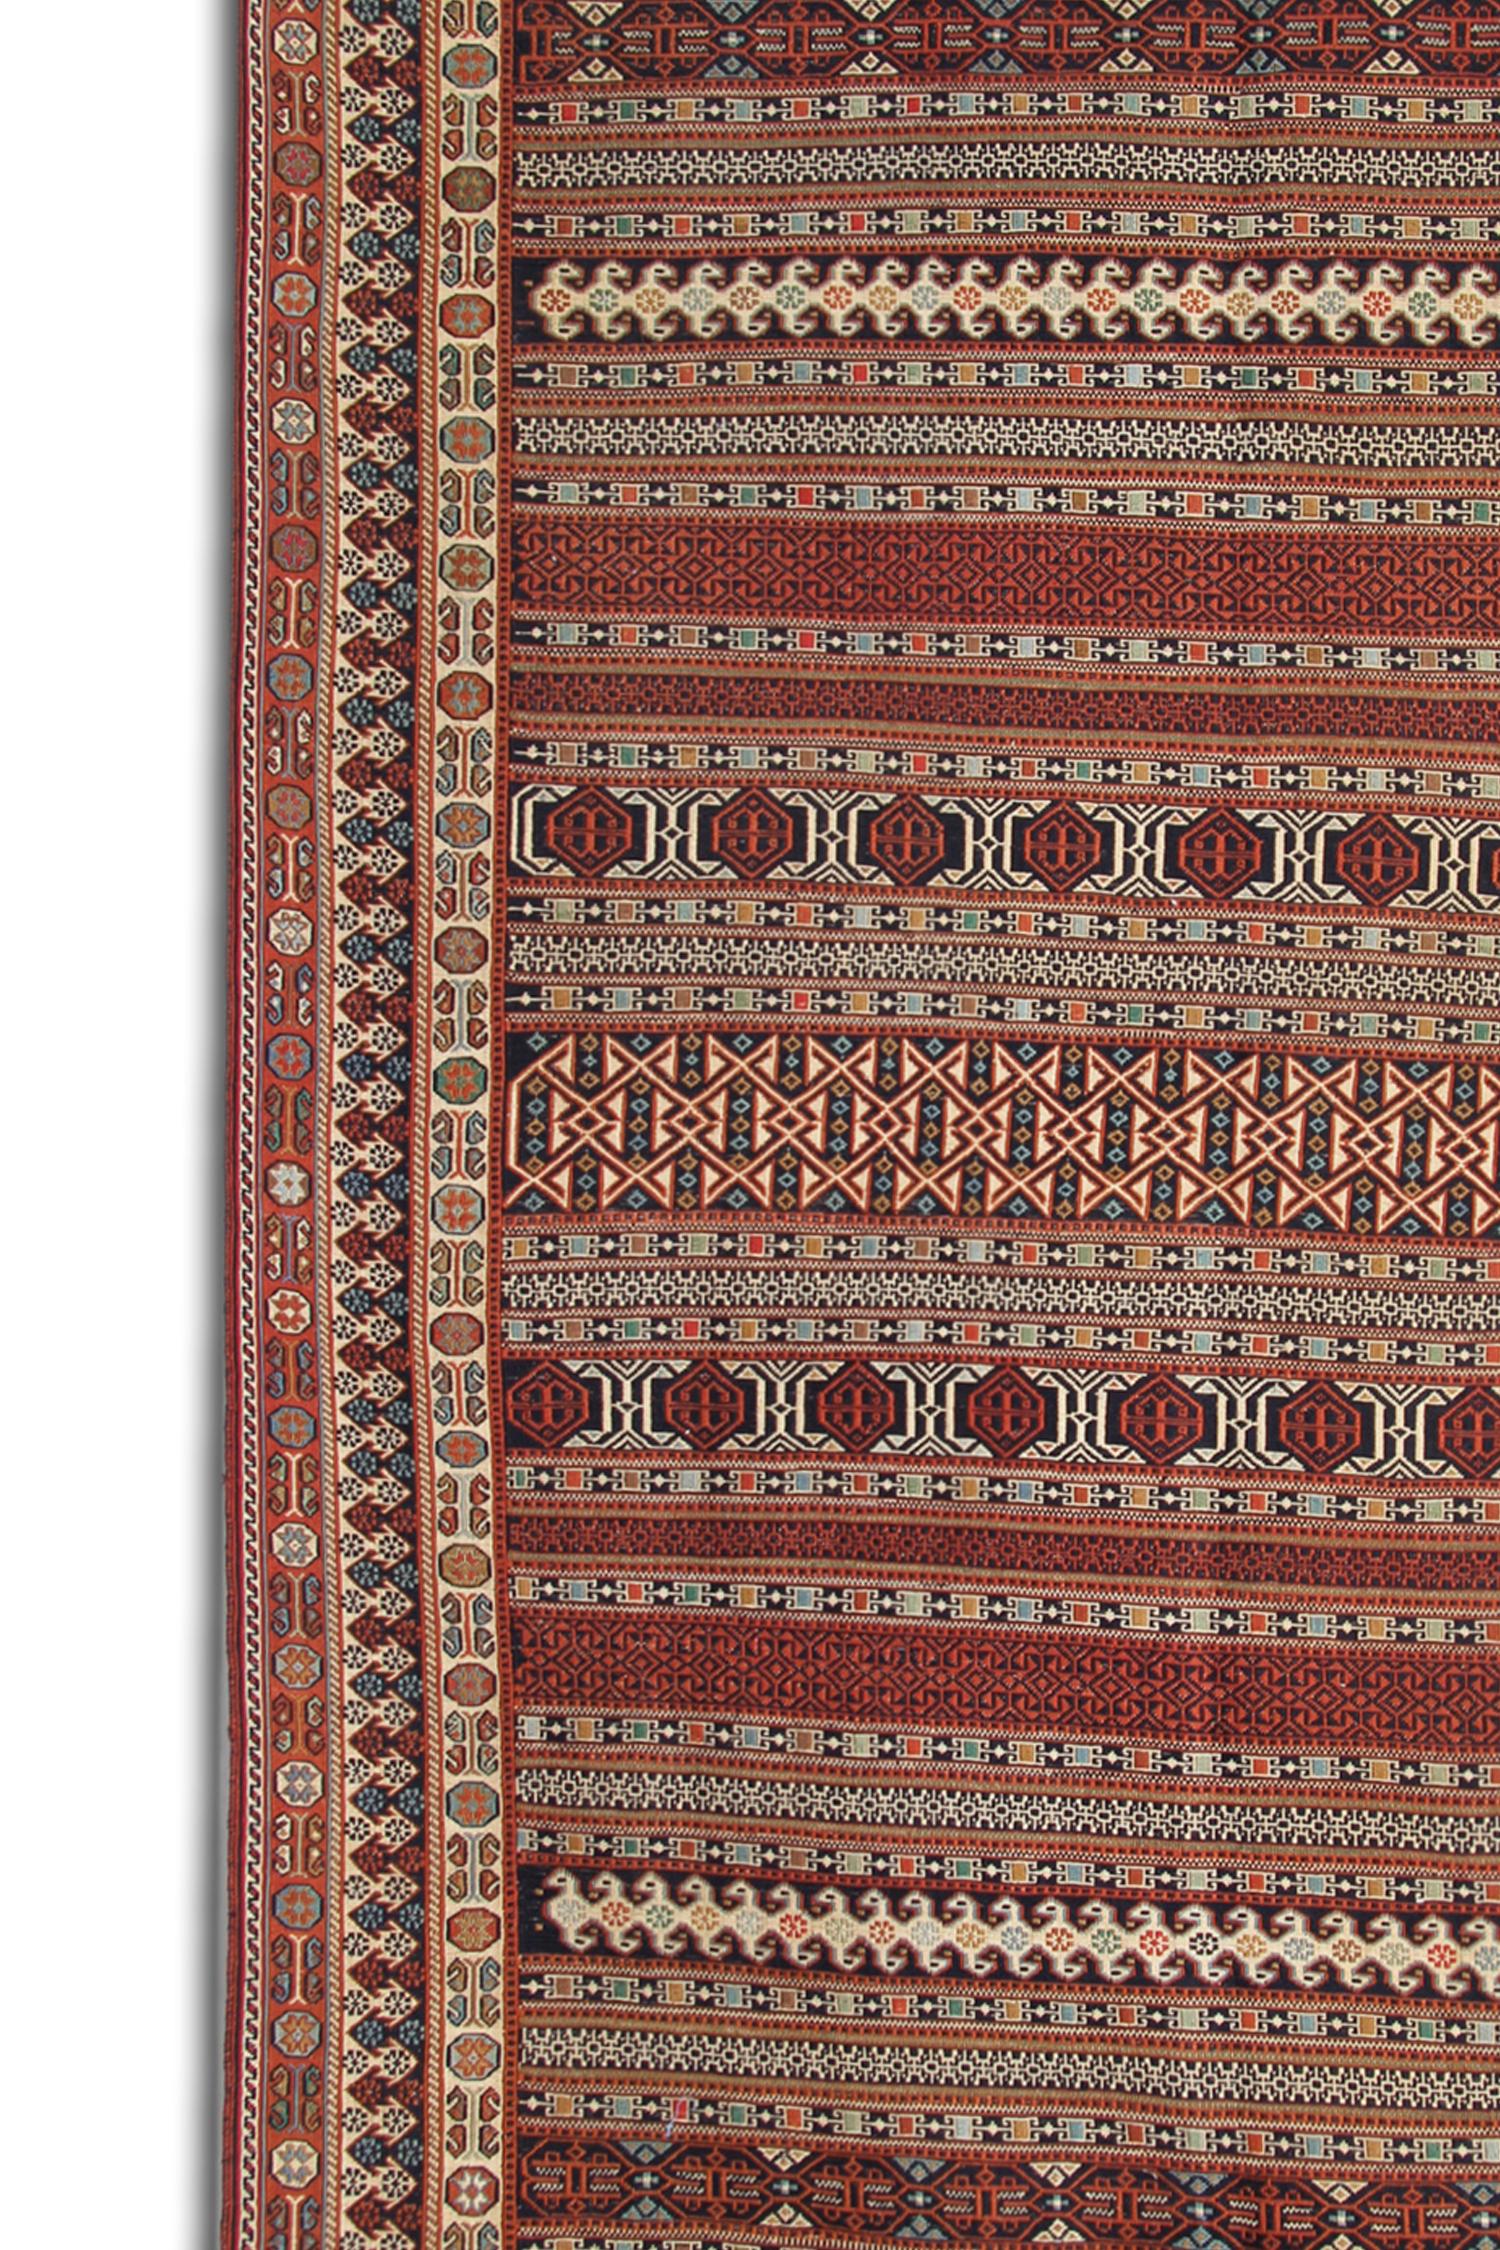 This Soumak vintage rug was produced by nomads in the late 20th century, circa 1980. The design features a rustic decorative stripe design, woven in a deep red with accent colours of rust beige and cream. 
Using geometric patterns, medallions with